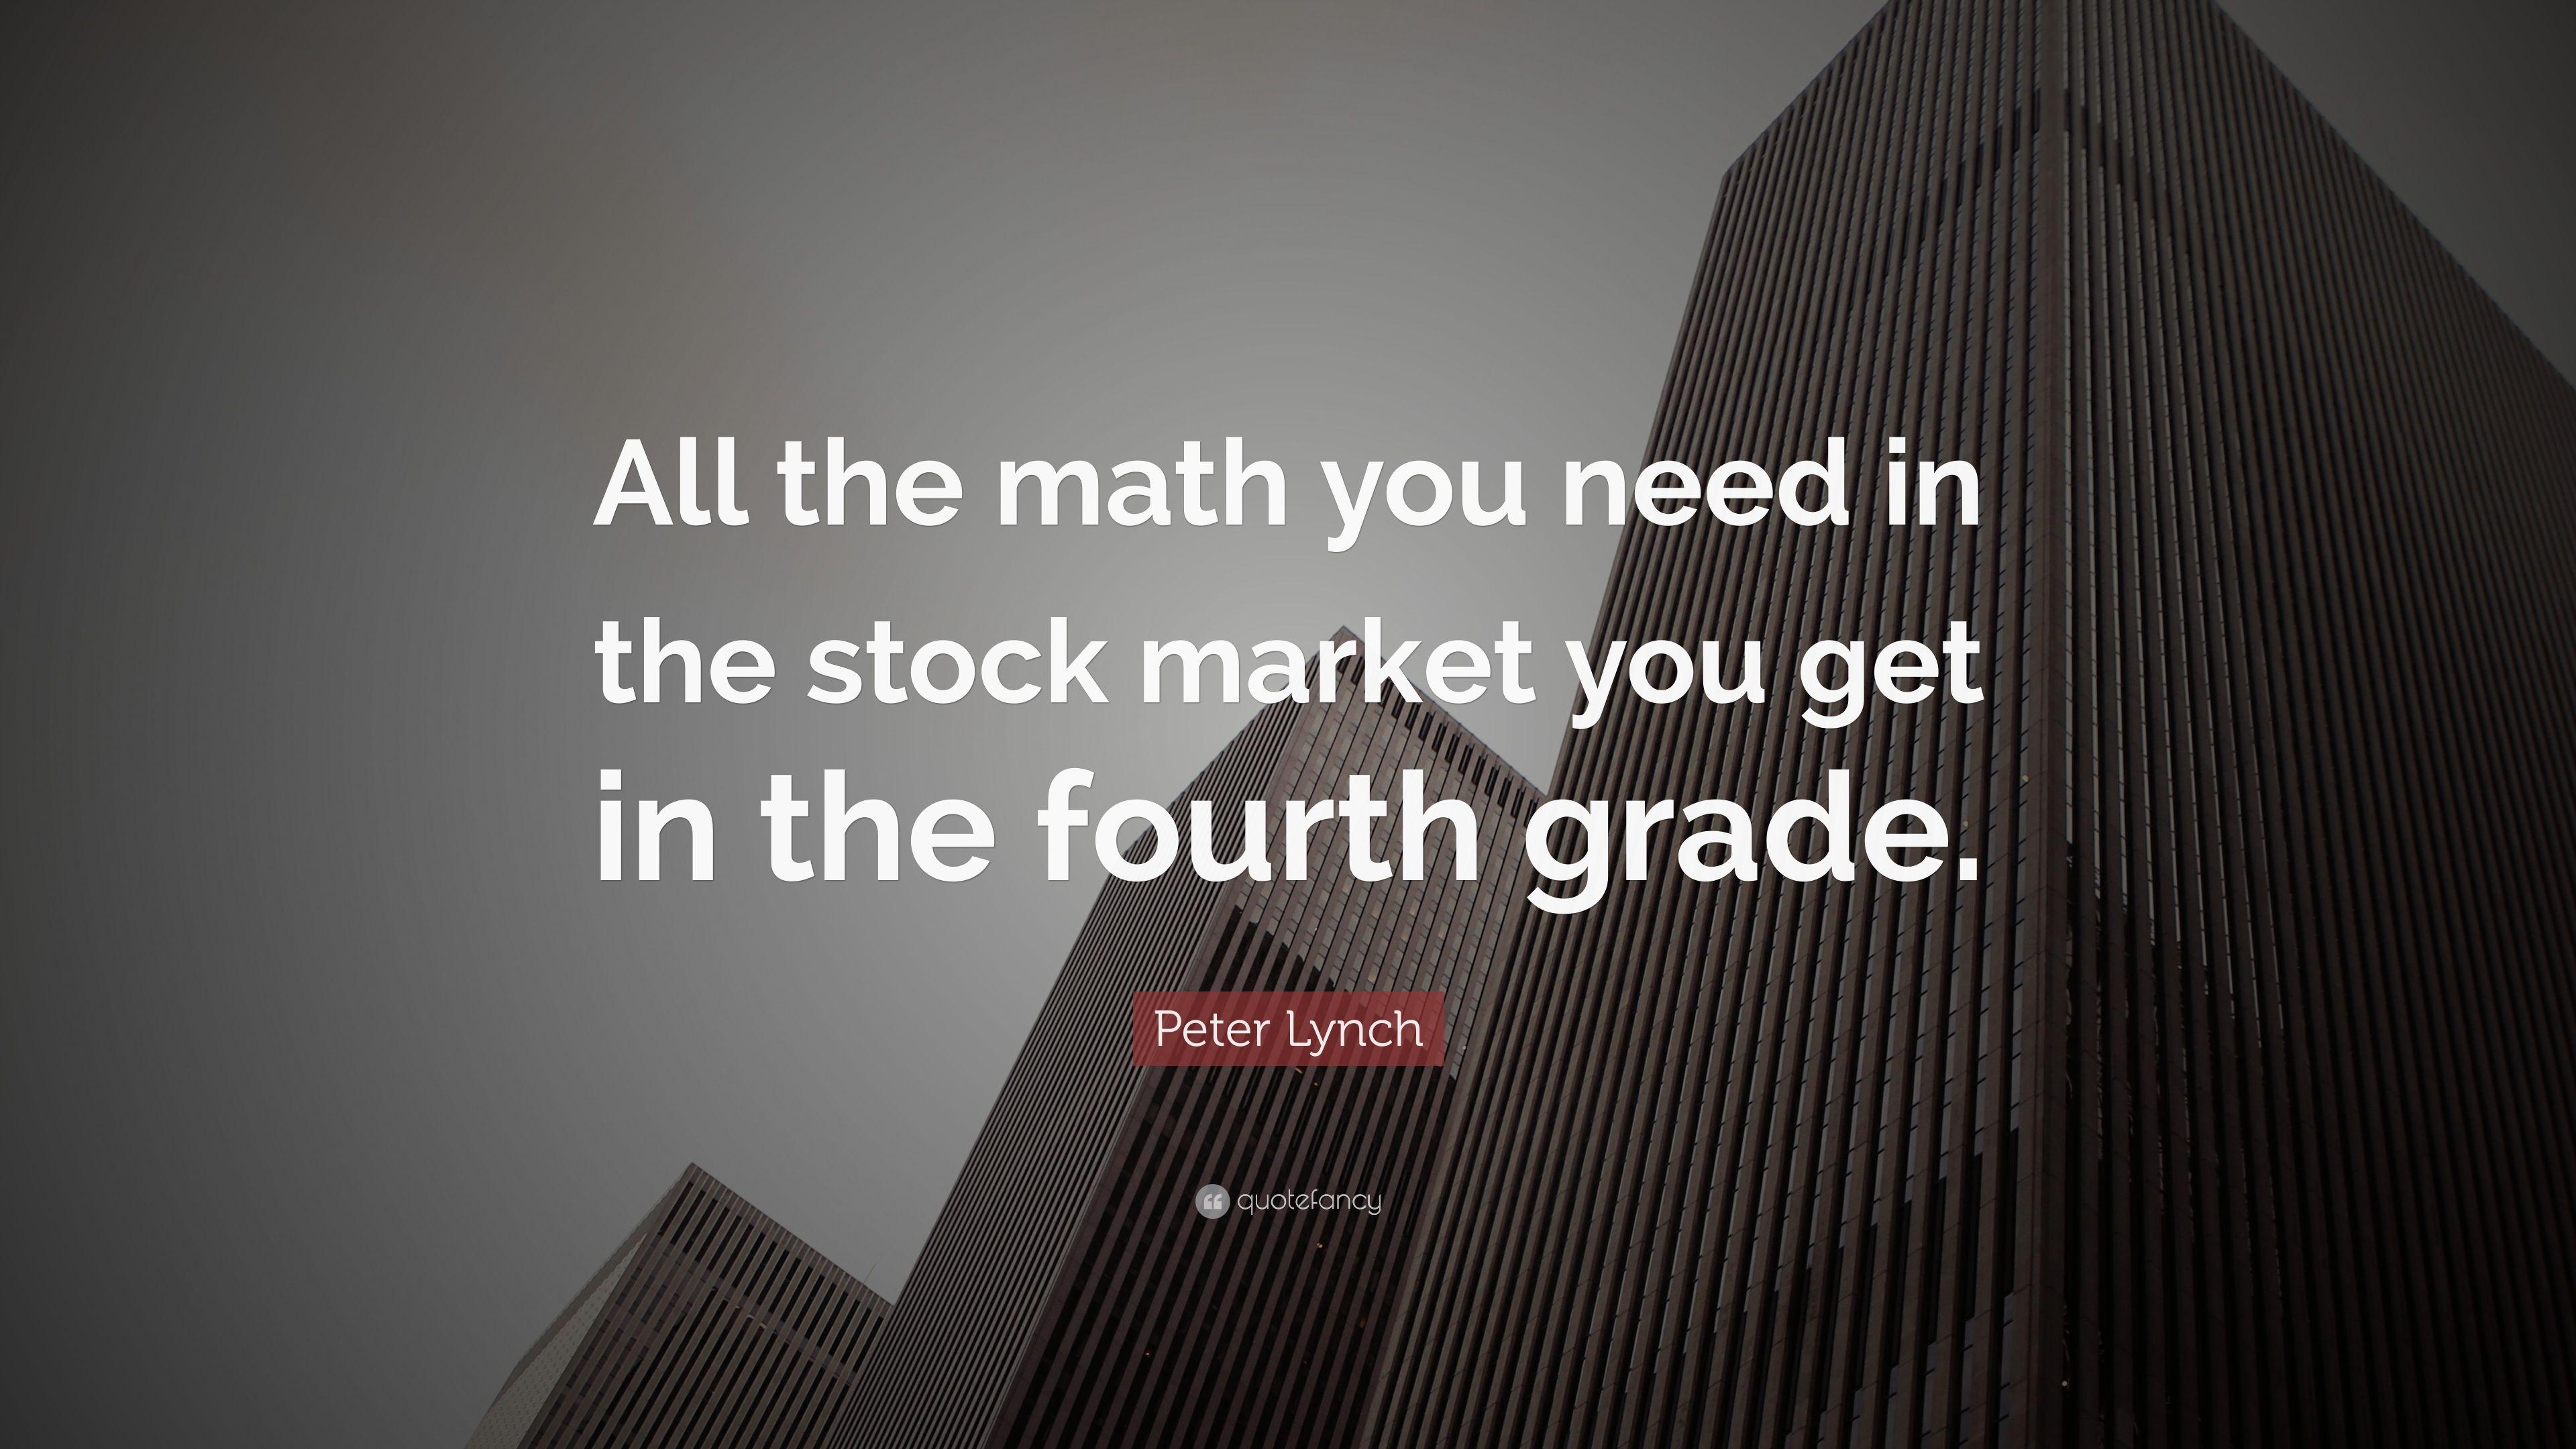 Peter Lynch Quote: “All the math you need in the stock market you